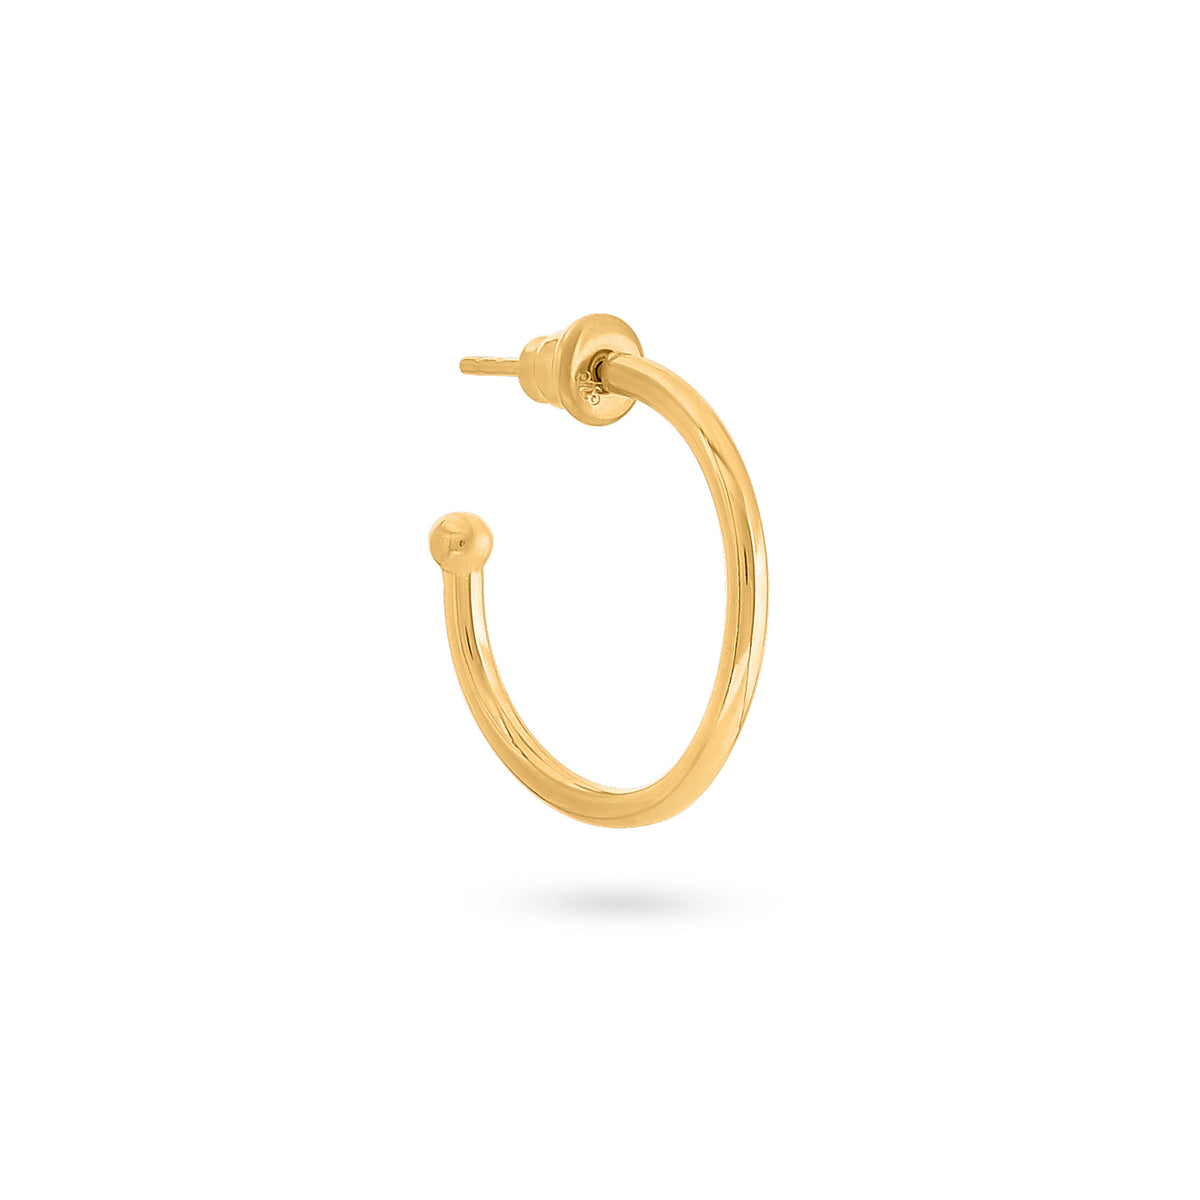 aradiso Perduto Collection OPEN HOOPS gold plated CLASSIC HOOP EARRINGS open with butterfly closure 0.2CM THICK WIRE AVAILABLE IN 2 SIZES SIZE XS IS Ø2CM SIZE S IS Ø3.5CM recycled 925 sterling silver 18 carat gold plated Handmade in Bali